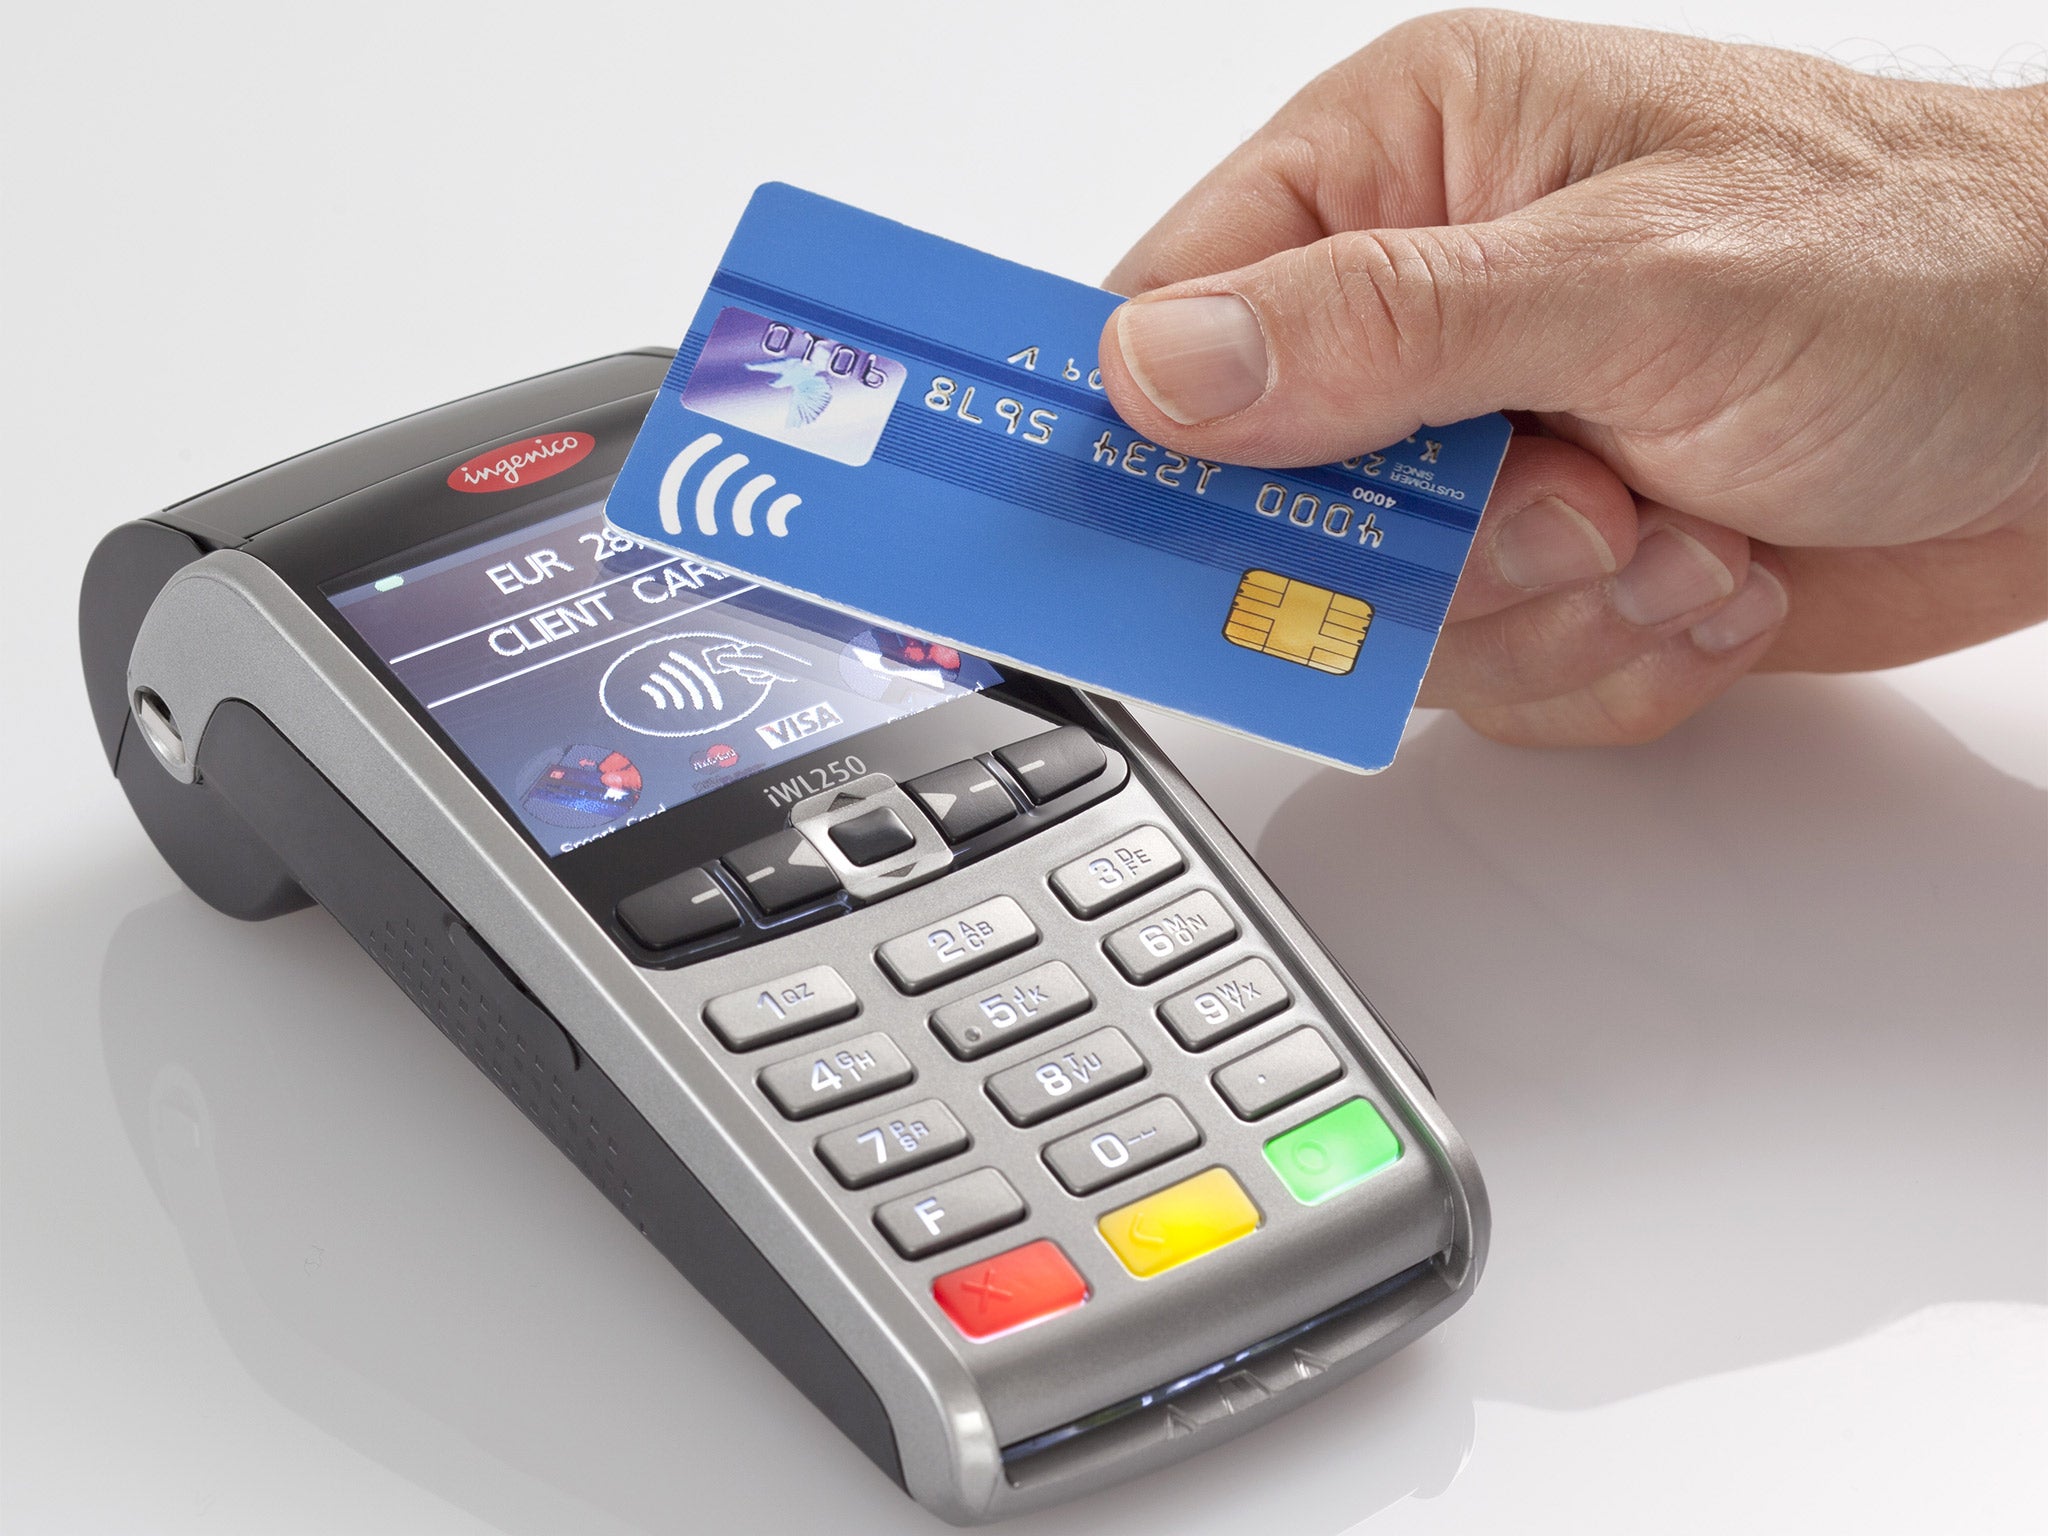 Contactless transactions are supposed to be limited to a maximum of £20